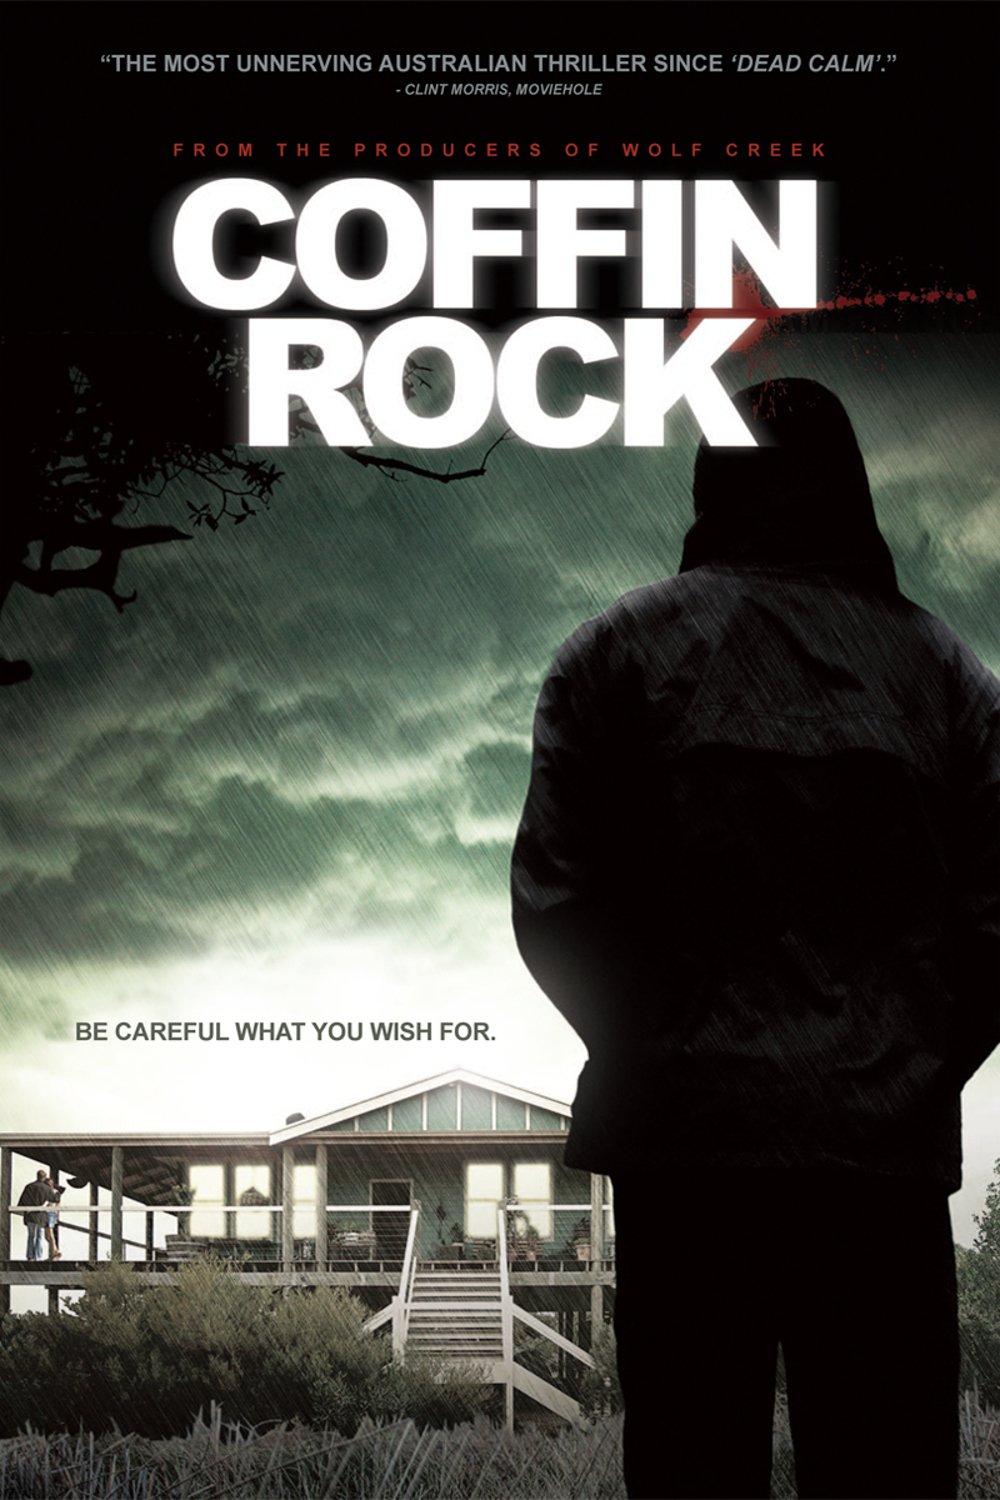 Poster for the movie "Coffin Rock"